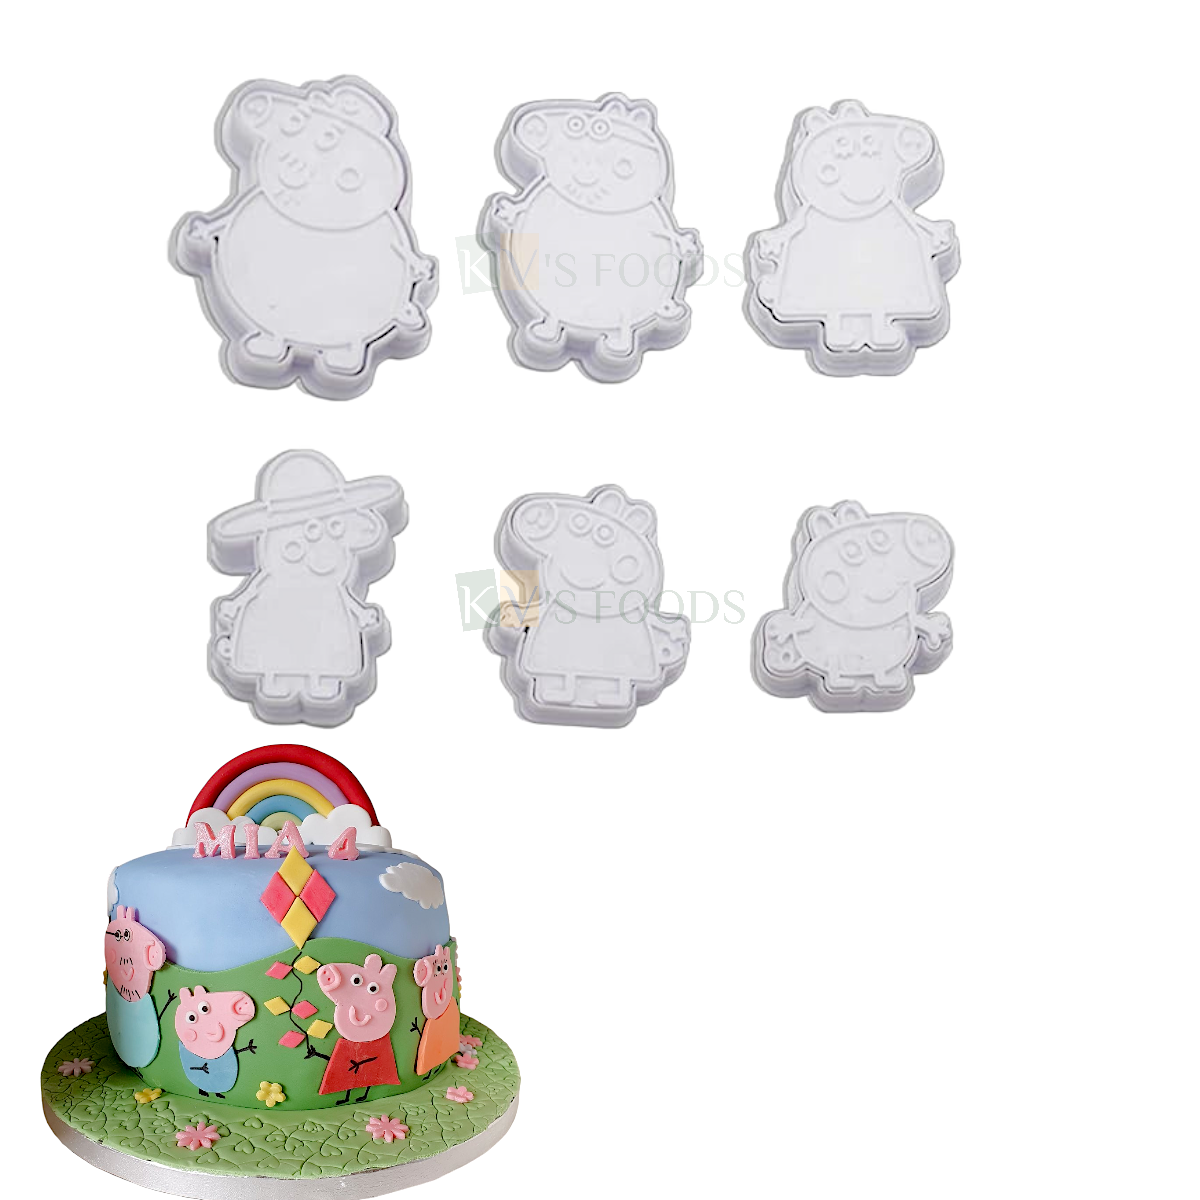 6 PCs White Peppa Pig Piglet Family Members Fondant Cutters Plungers Cake Mould Chocolate Pancake, Biscuits Cookies Cutters Kids Girls Birthday Theme, Baby Shower Theme, DIY Cake Decorations